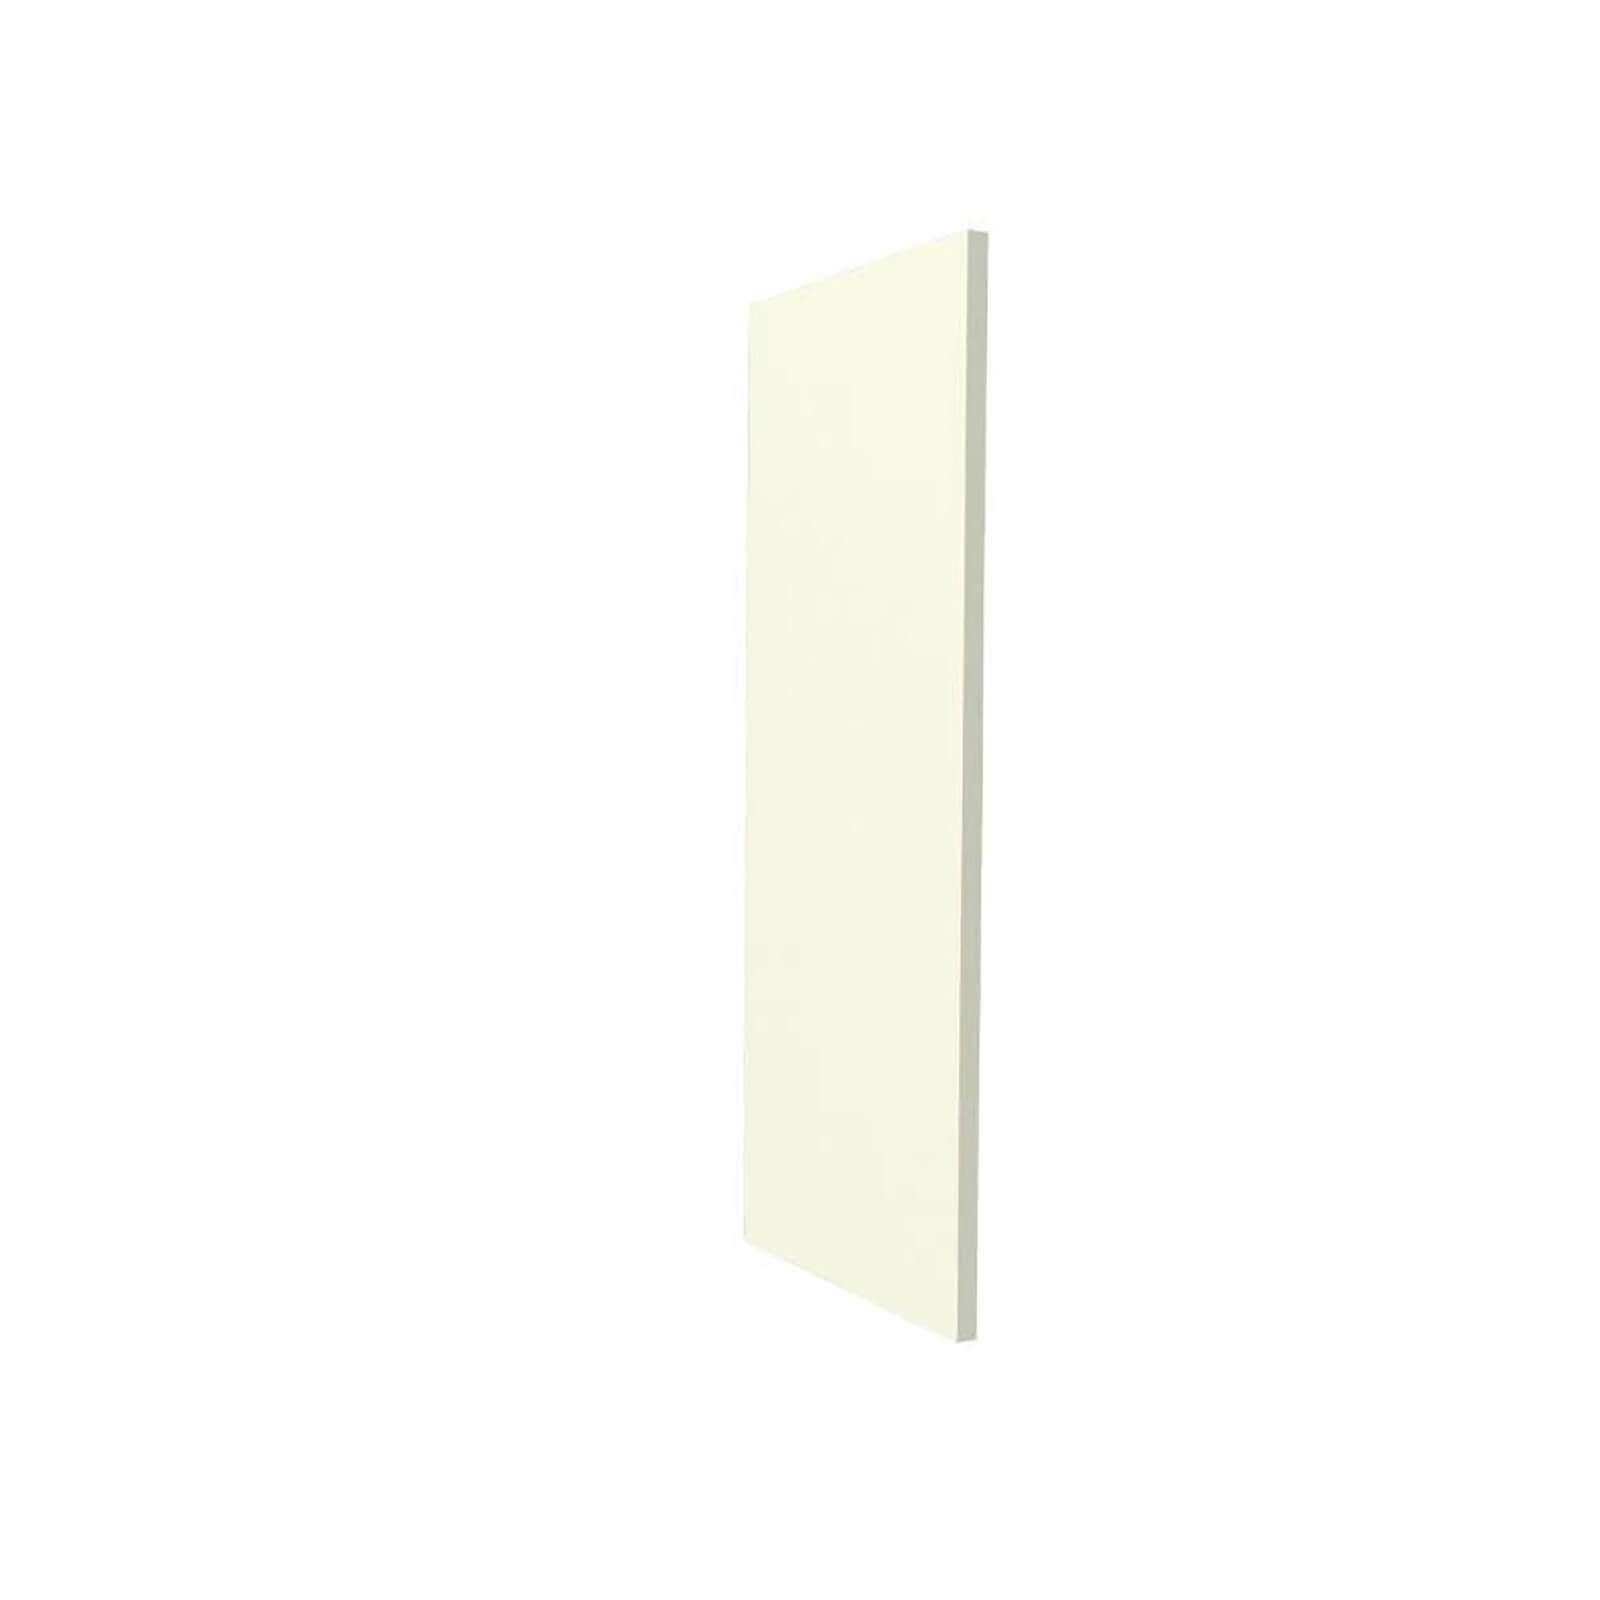 Country Shaker Kitchen Clad on Wall Panel (H)752 x (W)343mm - Cream